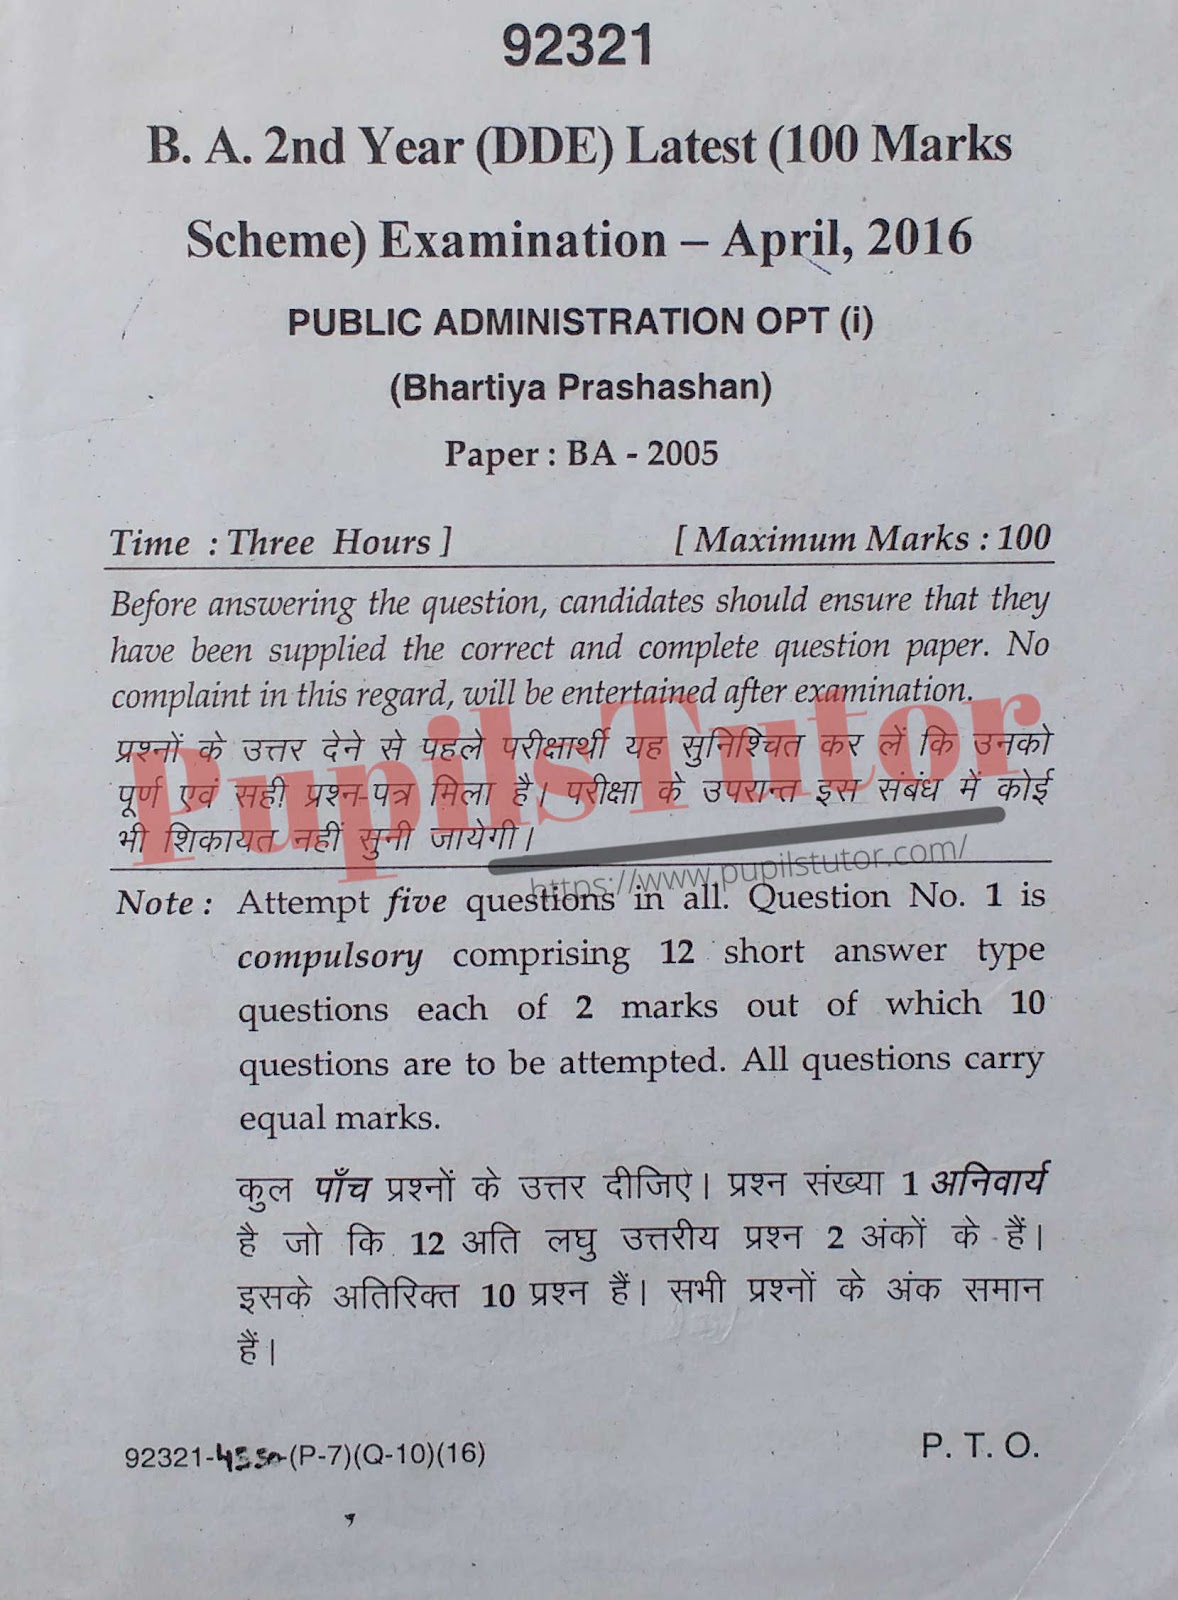 MDU DDE (Maharshi Dayanand University - Directorate of Distance Education, Rohtak Haryana) BA  Second Year Previous Year Public Administration Question Paper For April, 2016 Exam (Question Paper Page 1) - pupilstutor.com